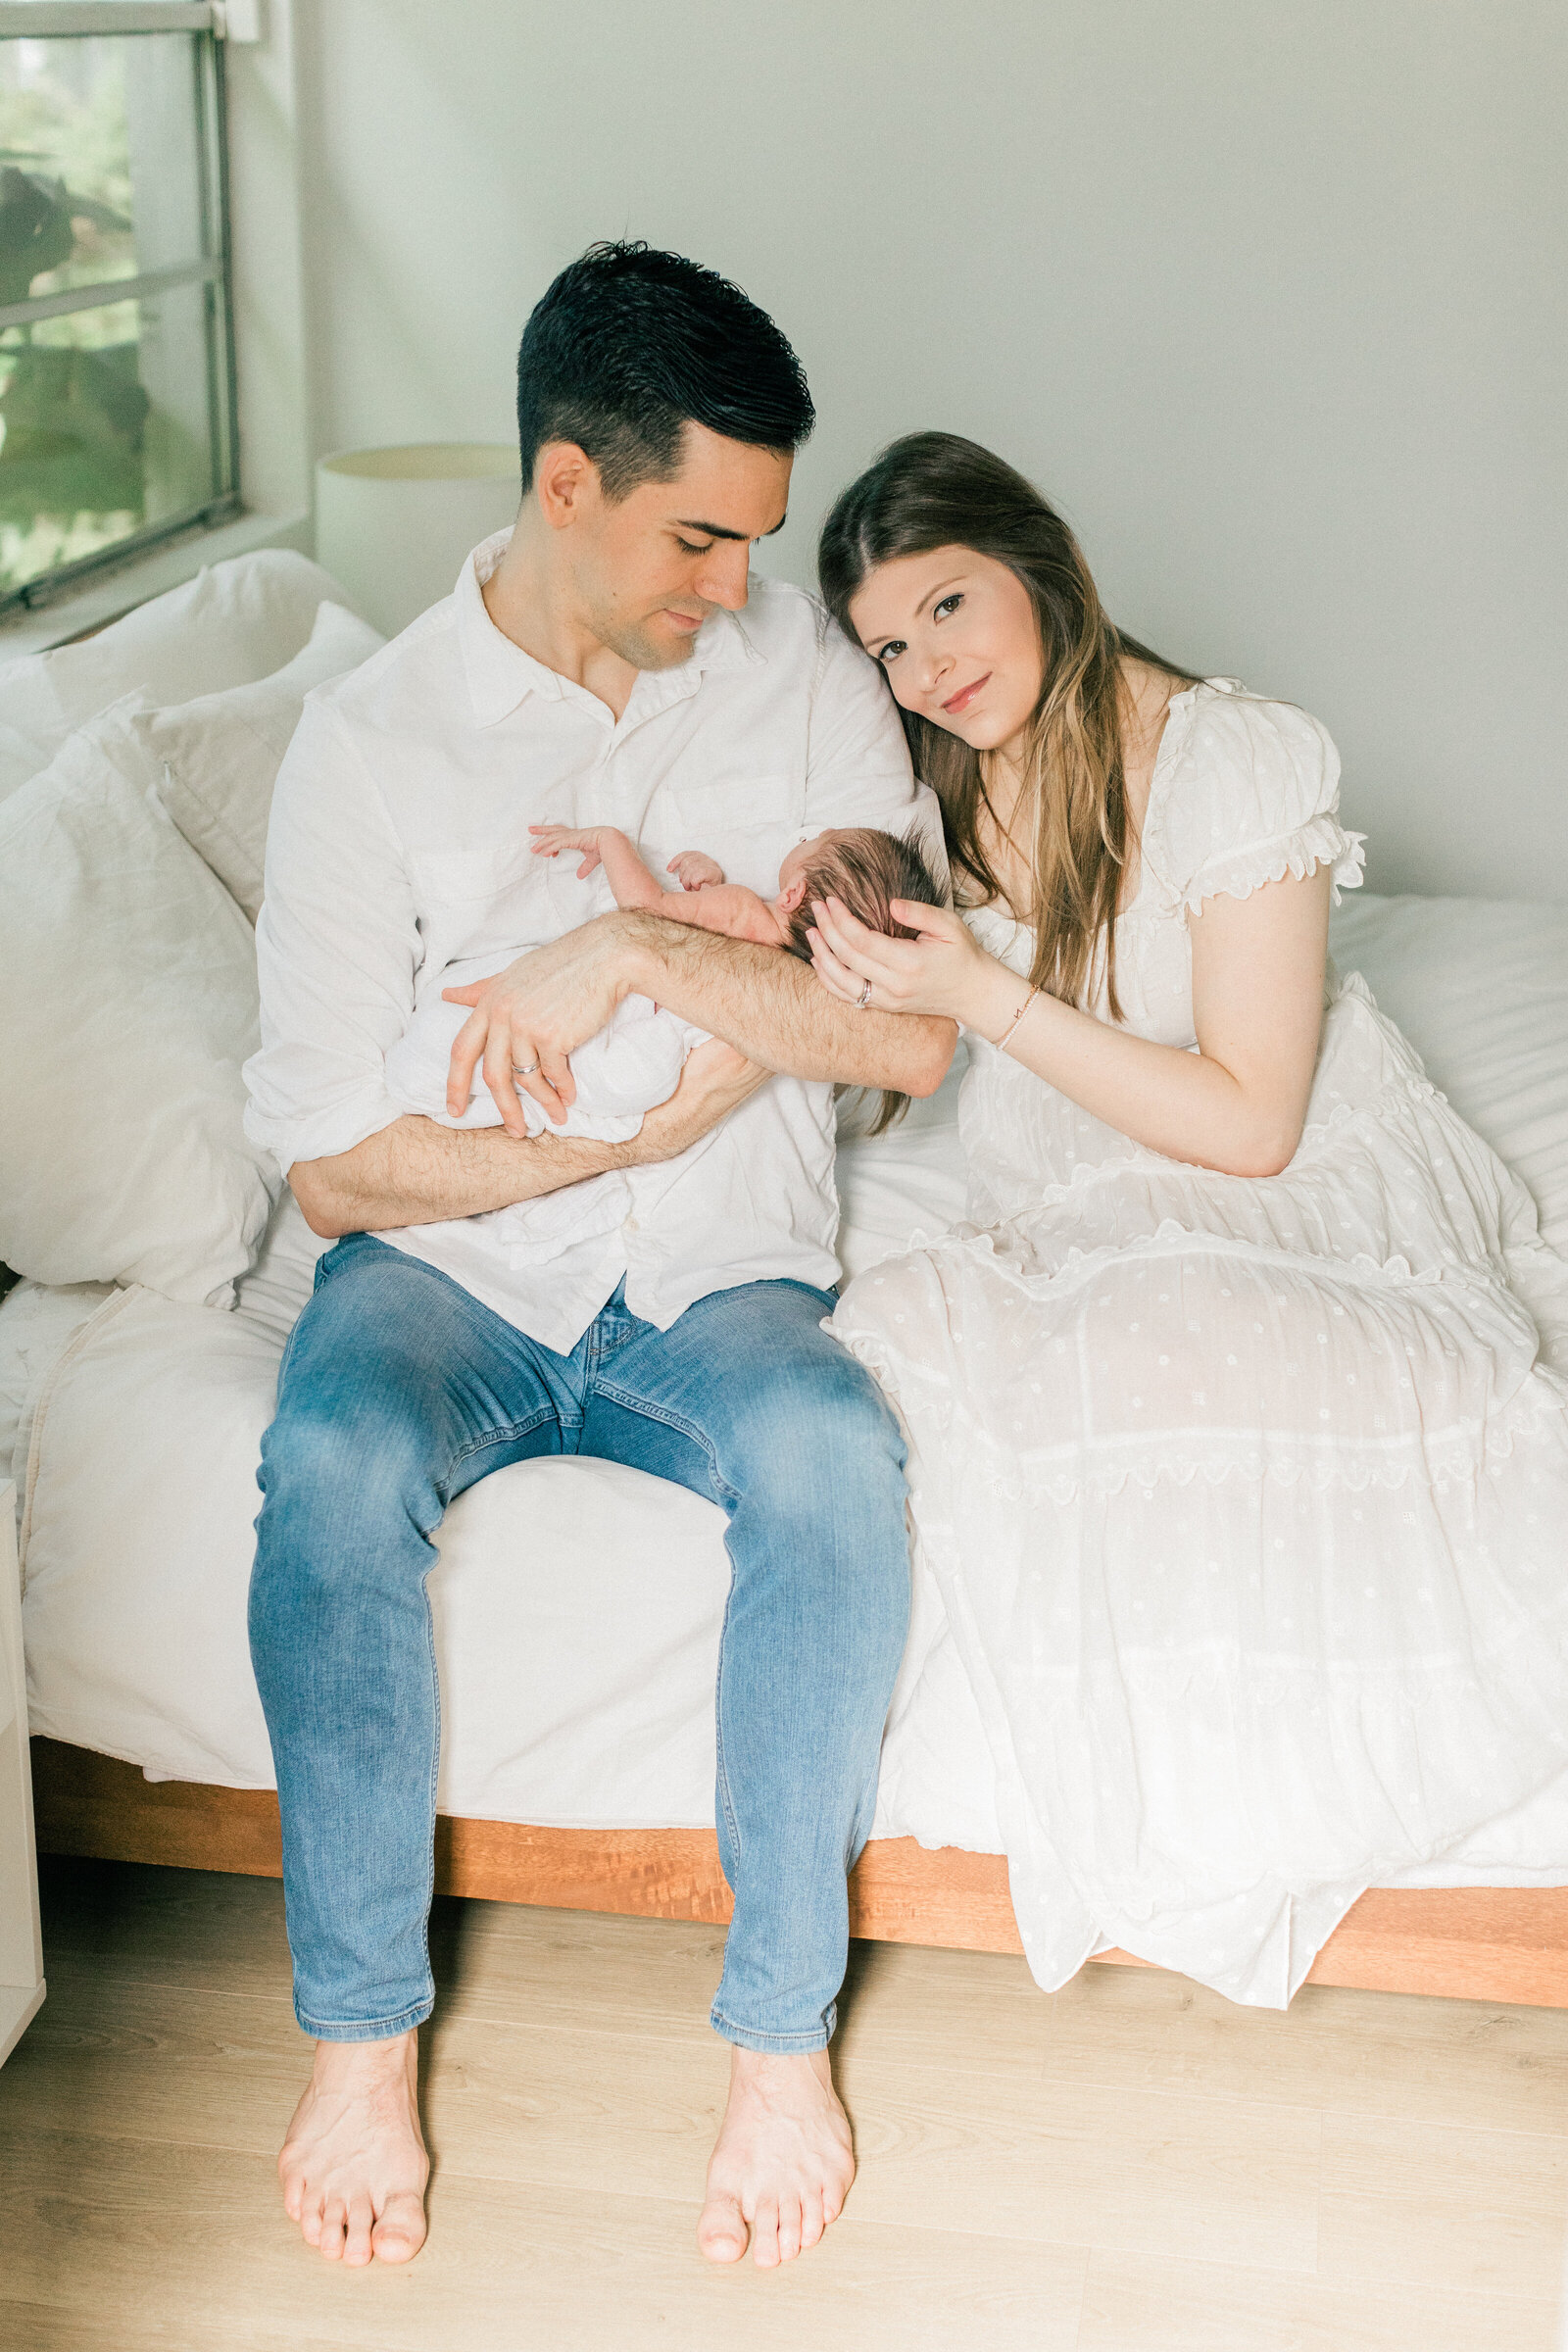 in-home newborn session with Orlando baby photographer